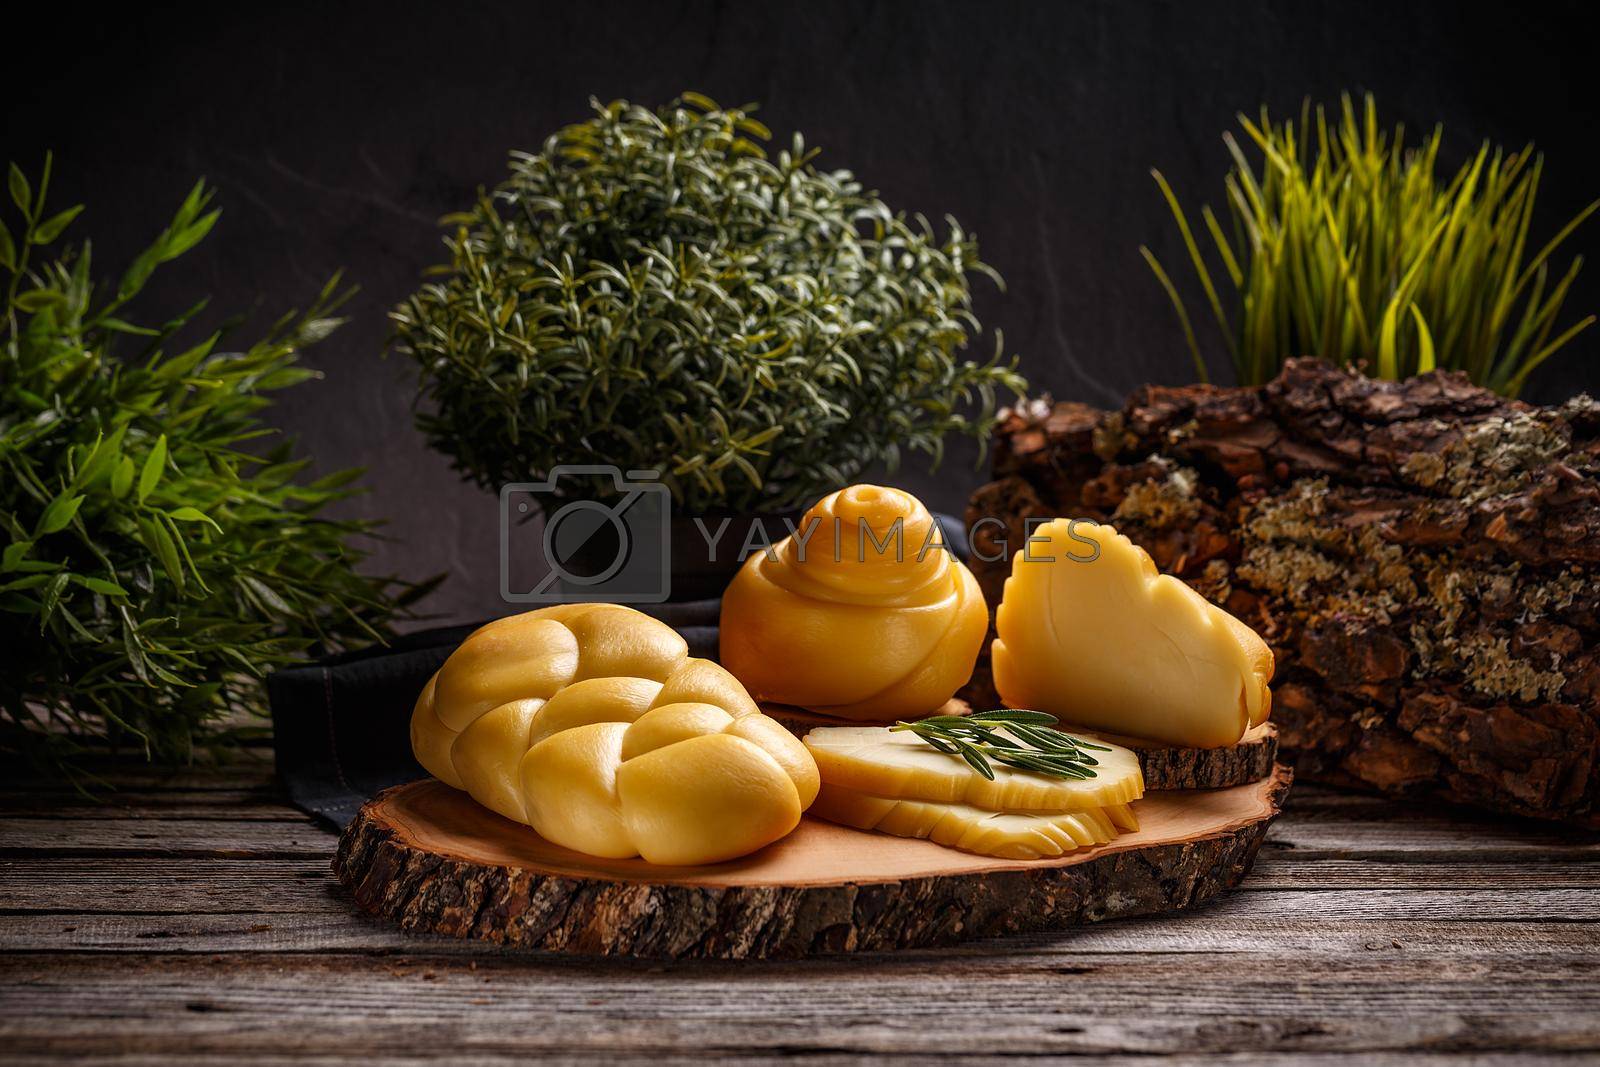 Royalty free image of Smoked braided cheese  by grafvision